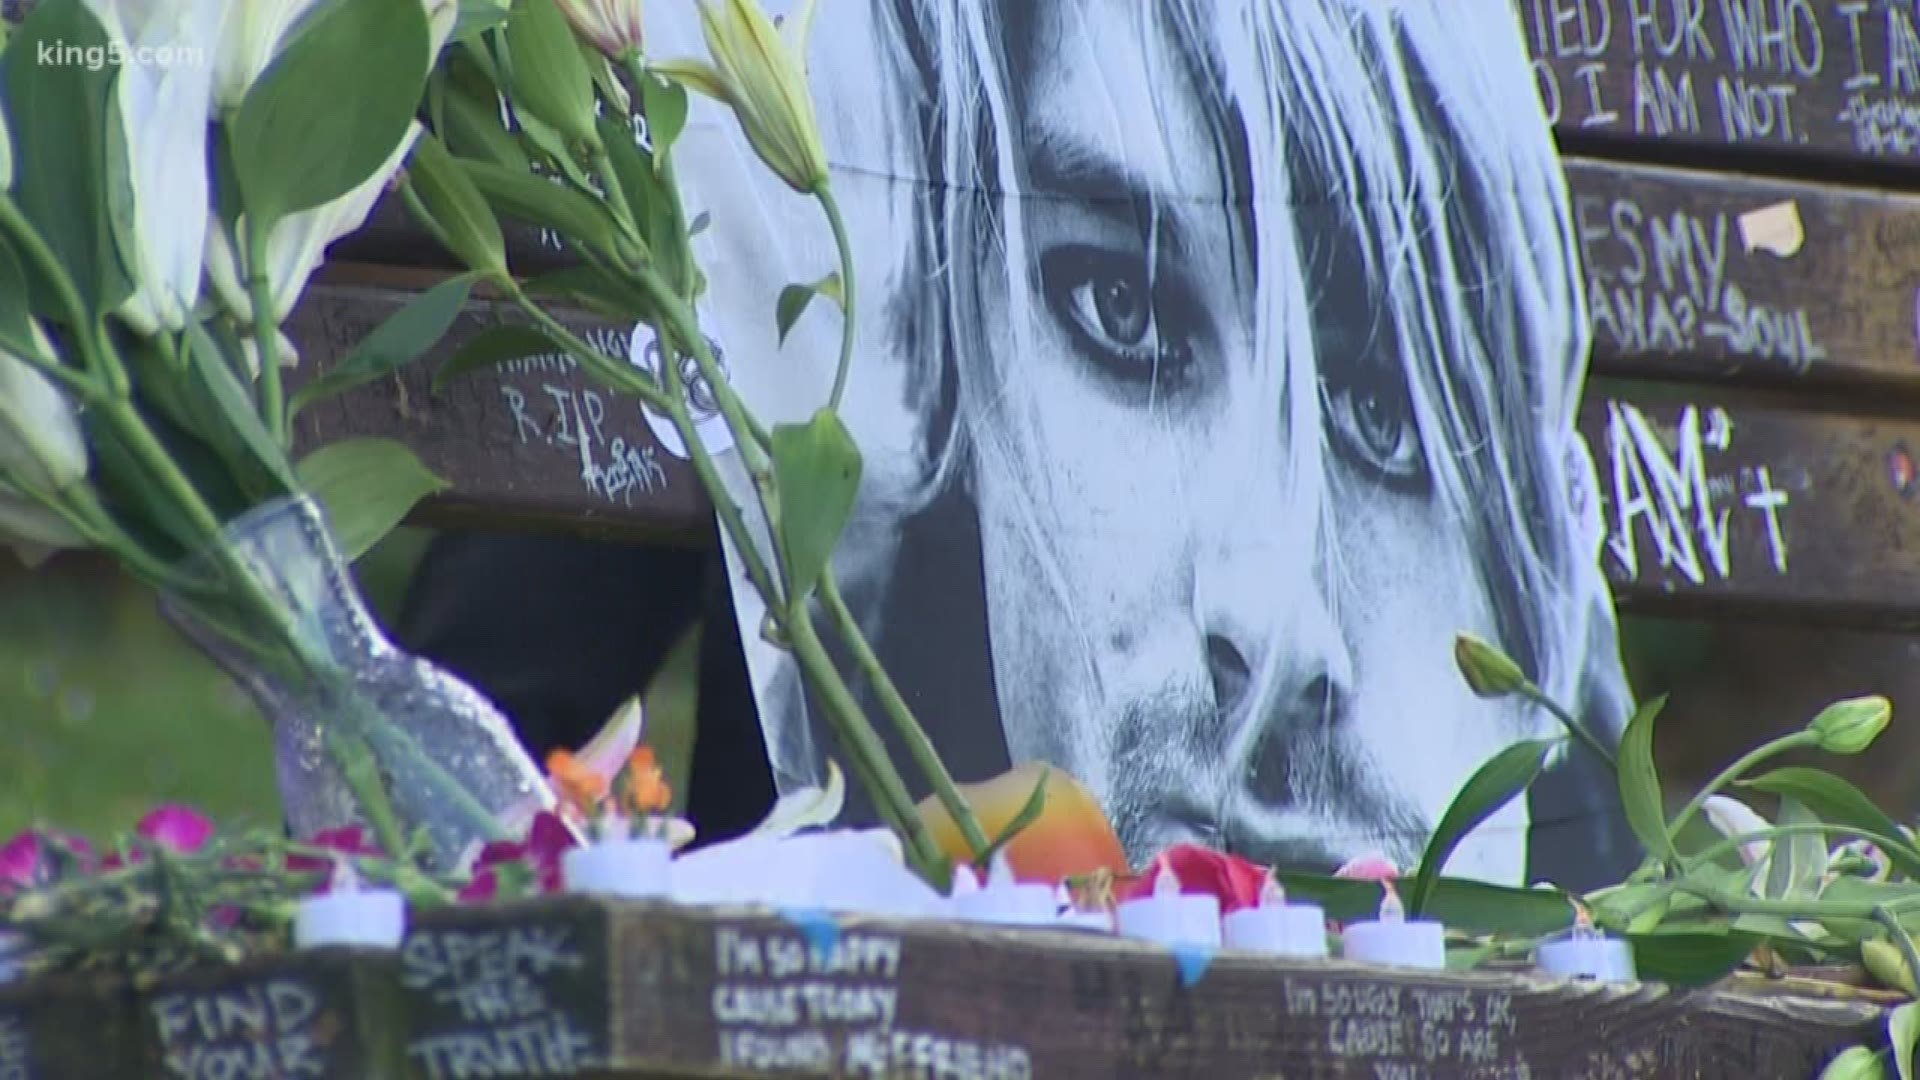 Kurt Cobain died from apparent suicide in 1994. Now 25 years later, his music is still impacting people. Fans of the late singer gathered at Seattle's Viretta Park to pay their respects. Others flocked to Seattle's MoPOP to view the exhibit in Nirvana's memory. KING 5's Michael Crowe reports.